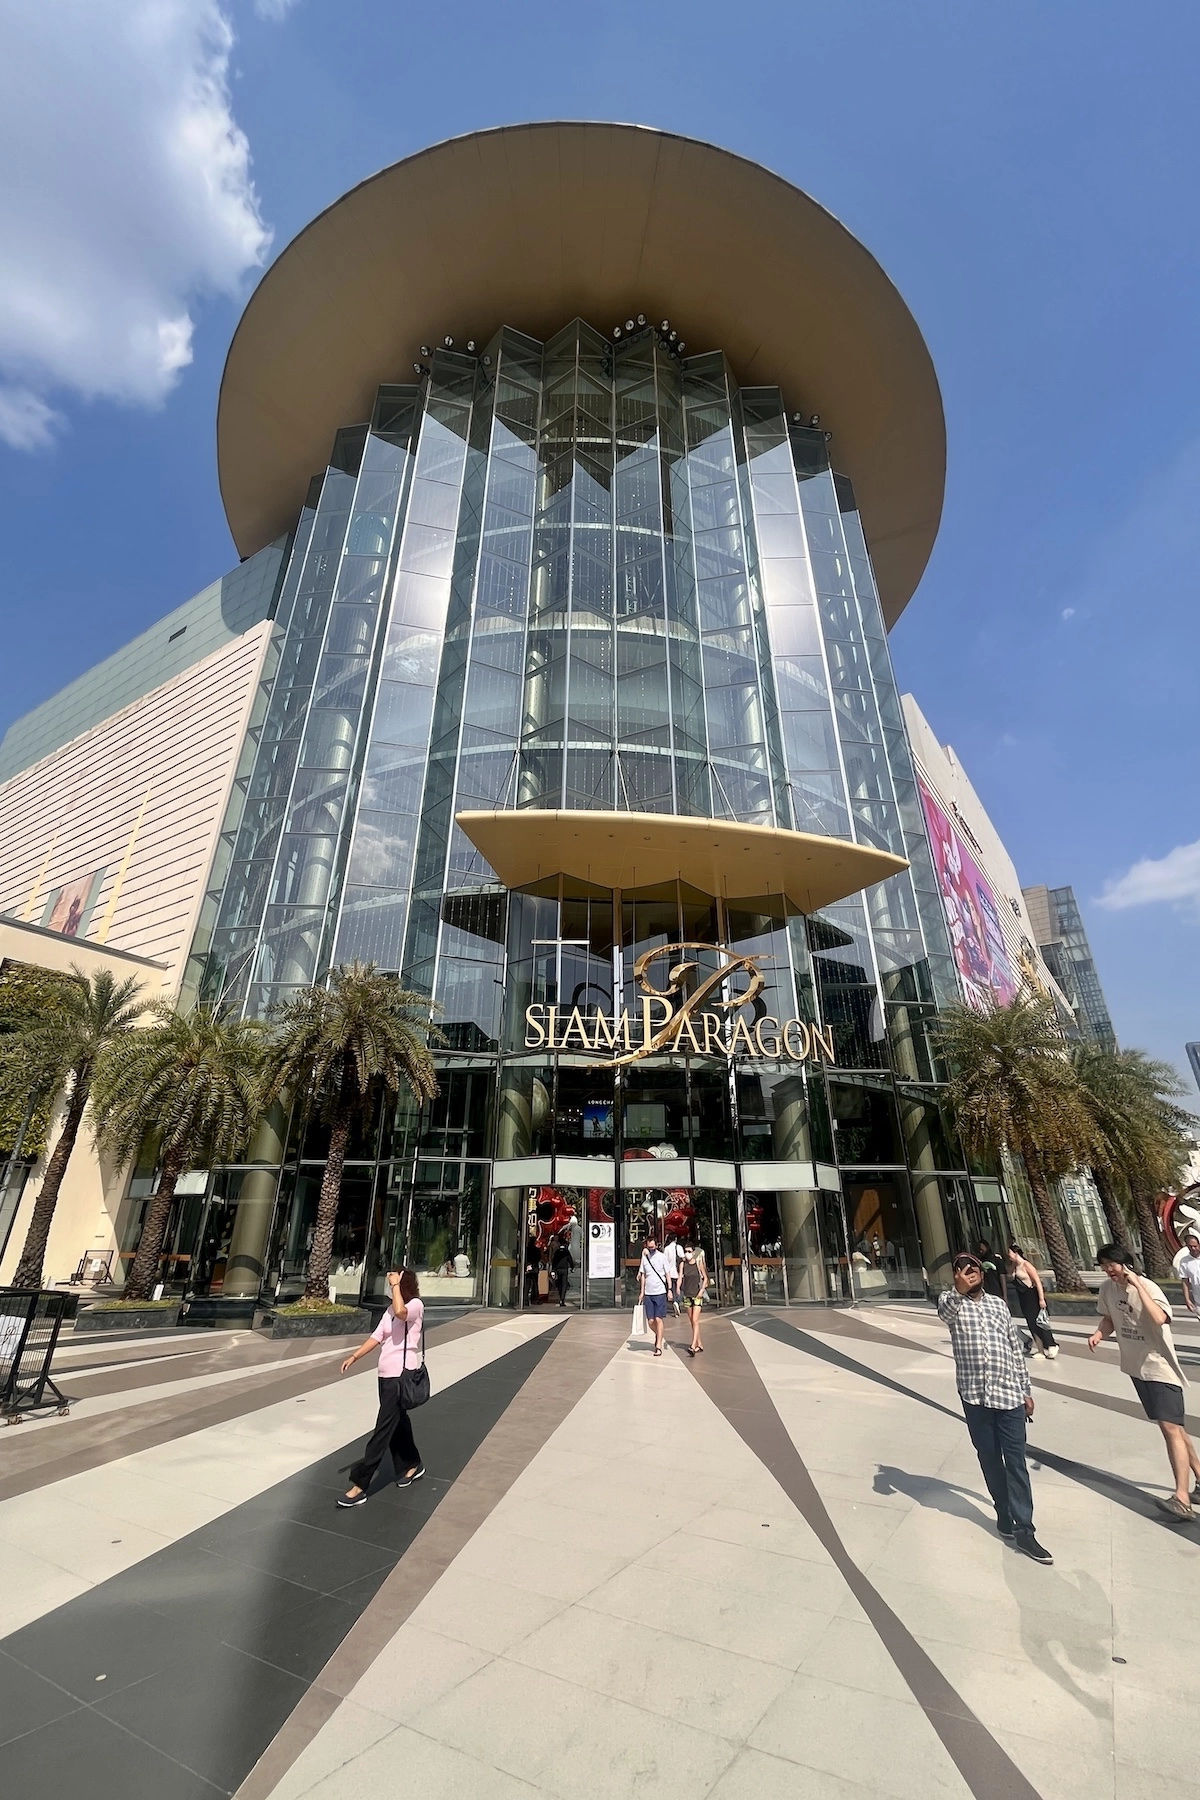 entrance of Siam Paragon in Bangkok Thailand during a beautiful day with a blue sky